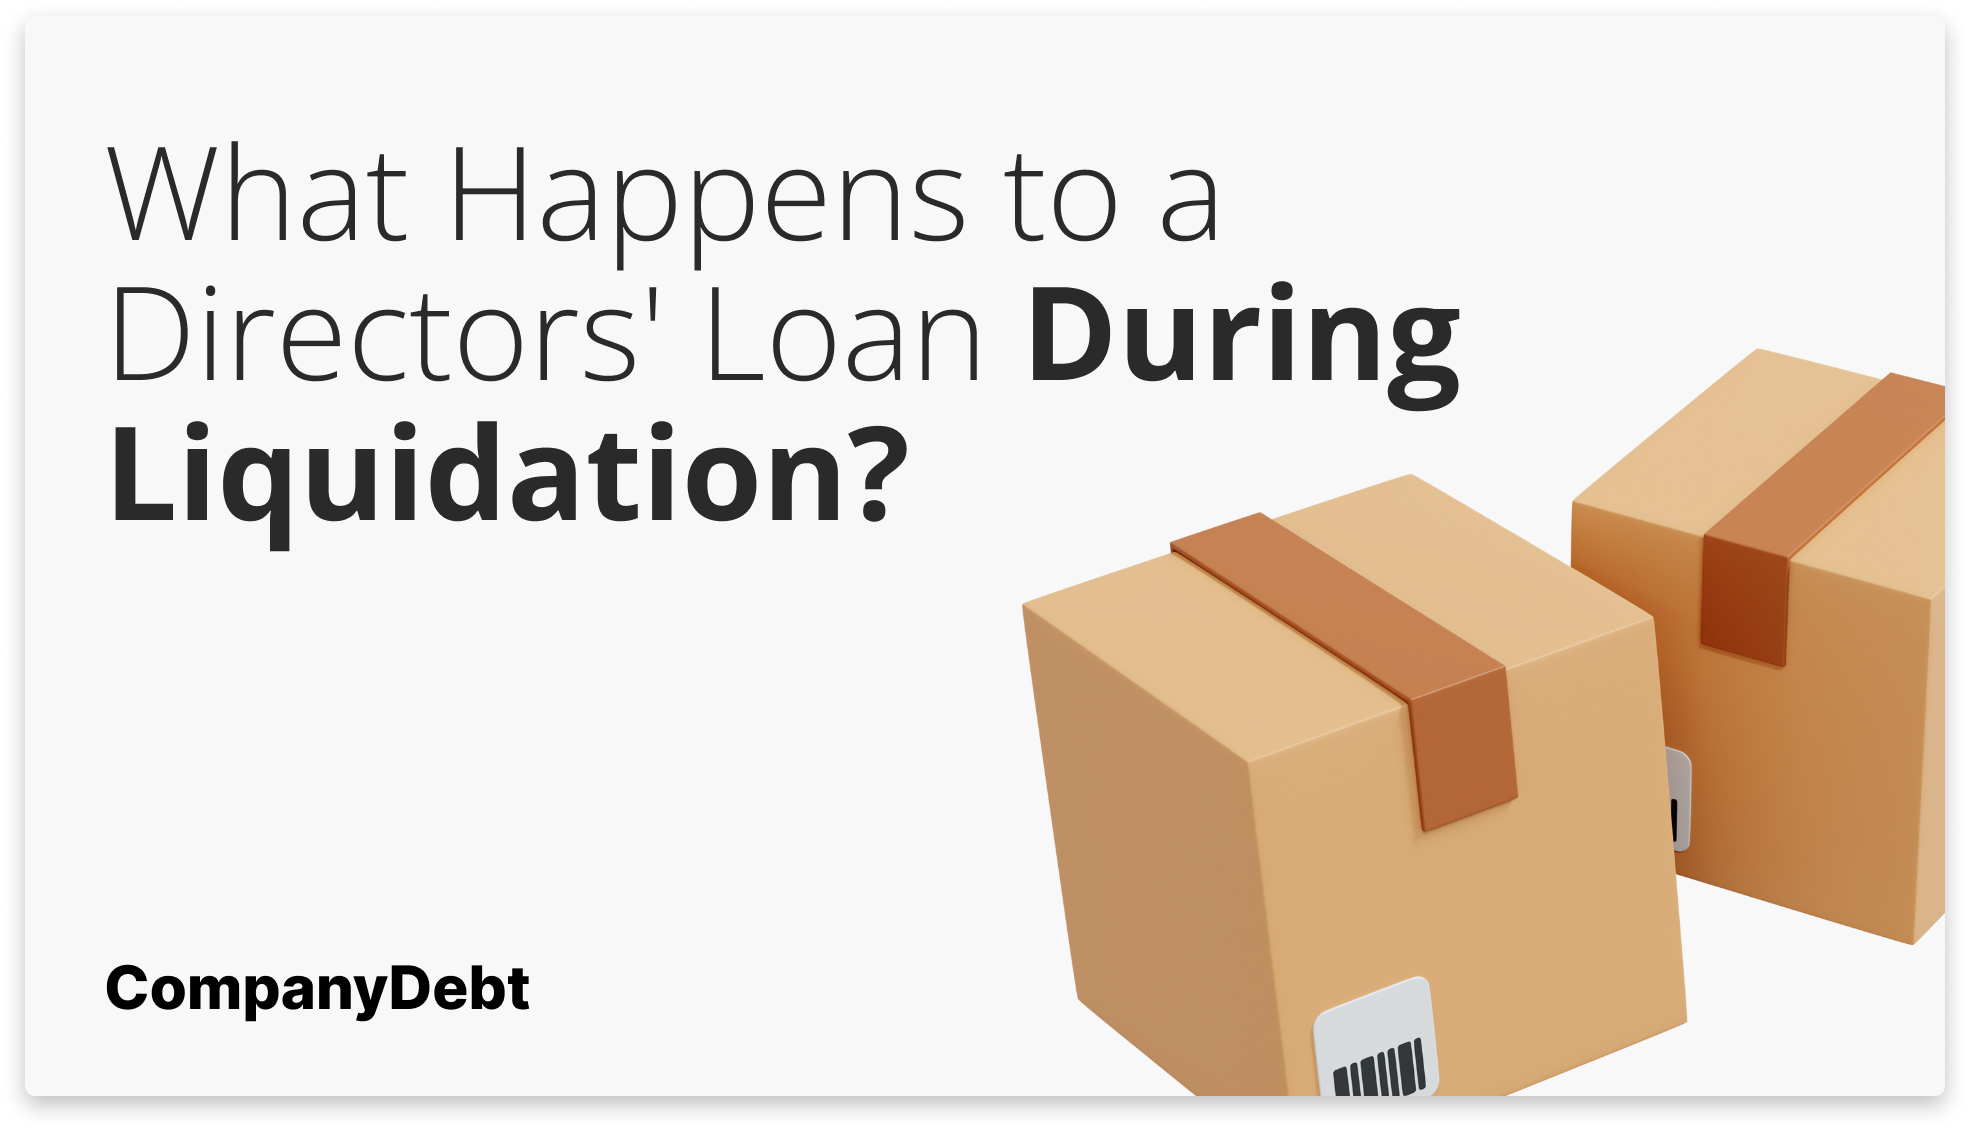 What Happens to a Directors' Loan During Liquidation